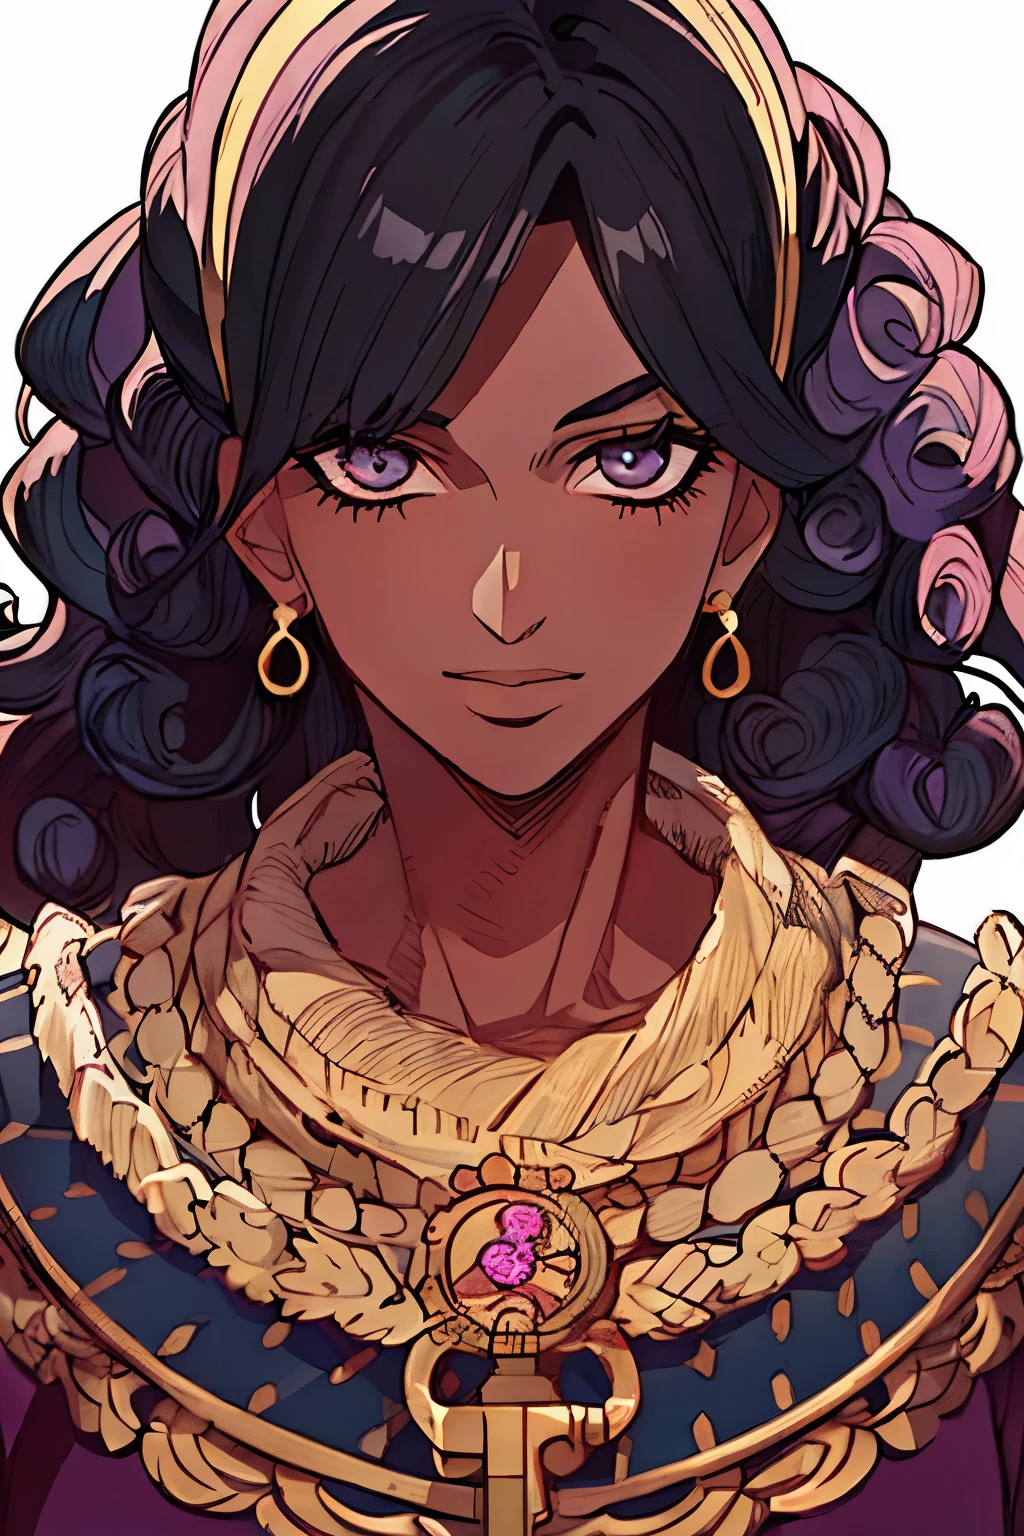 ((best quality)), ((masterpiece)), (detailed), perfect face, female, lovingly looking towards front, lovely delicate face, 24 years old woman, 24 years old woman, smiling, dark hair, large eyes, long hair, detailed key anime art, Jojo’s Bizarre’s Adventure, Jolyne, detailed key anime art, curly hair, hazel eyes, black hair, one woman, Mexican, dark skin, untied hair, pink dress, black hair, standing alone, portrait pose, delicate face, innocent, round eyes